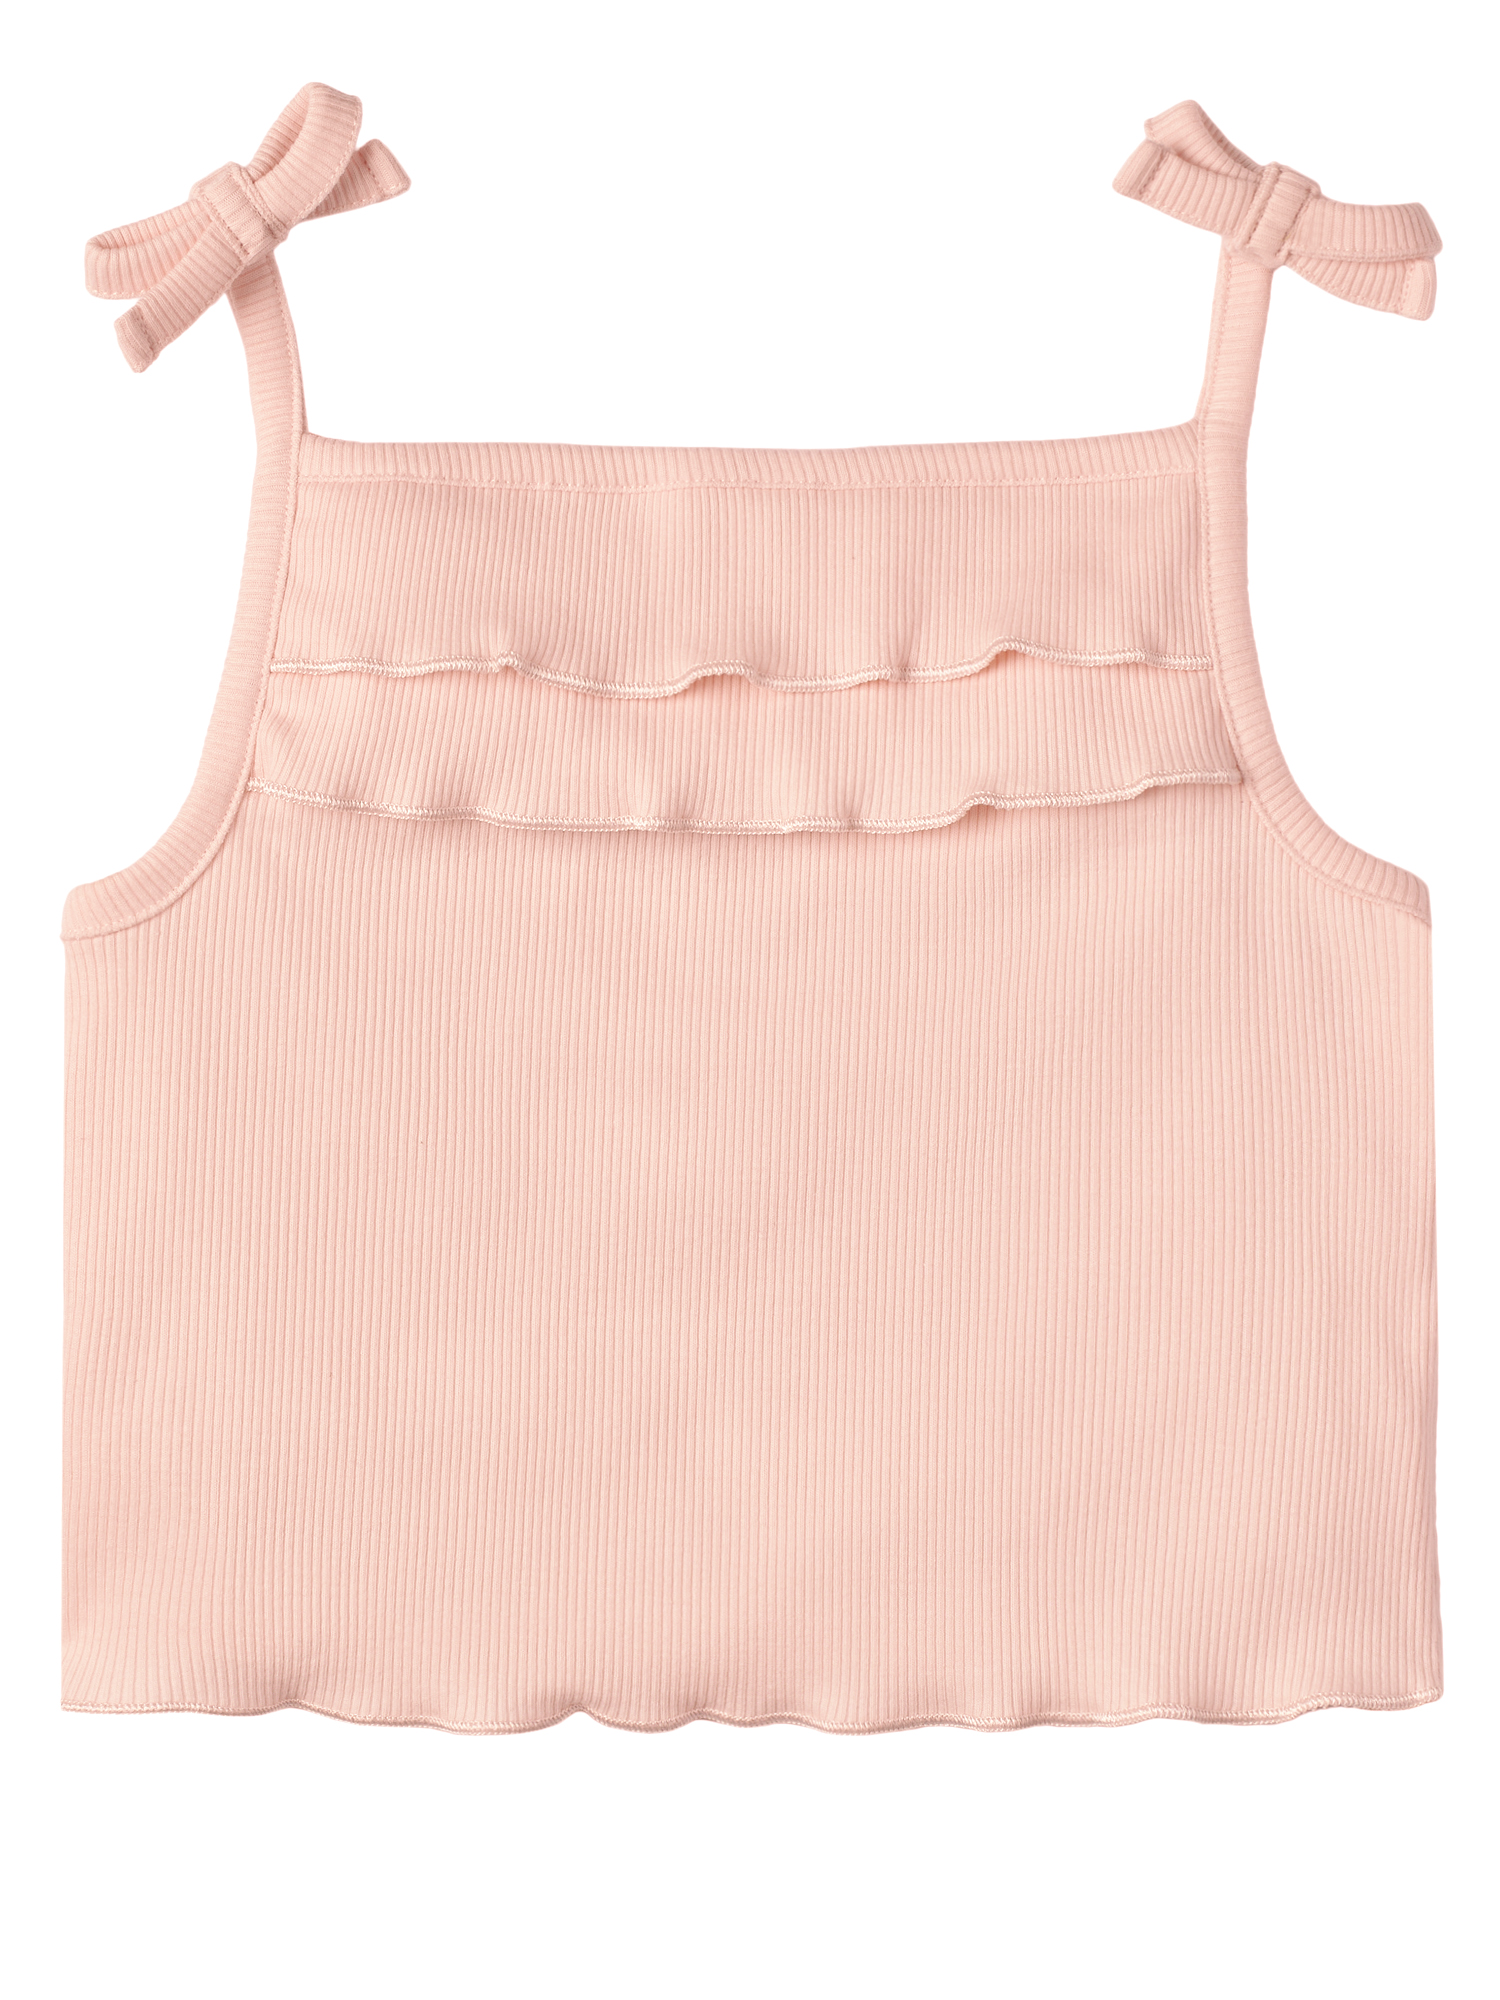 Modern Moments by Gerber Toddler Girl Ruffled Tank Top, 2-Pack, Sizes 12M-5T - image 5 of 14